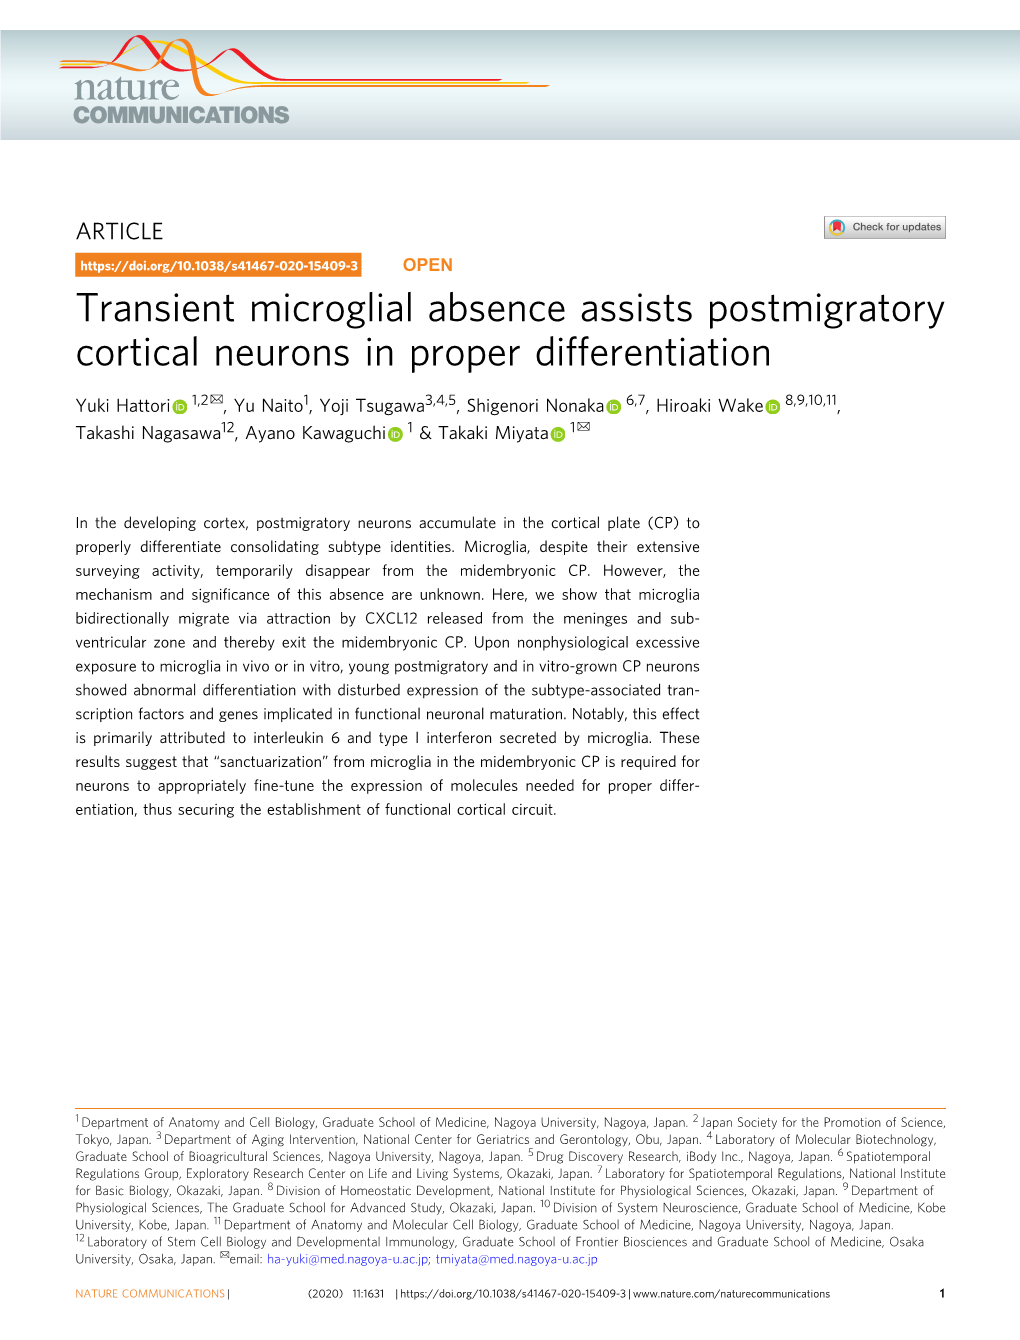 Transient Microglial Absence Assists Postmigratory Cortical Neurons In